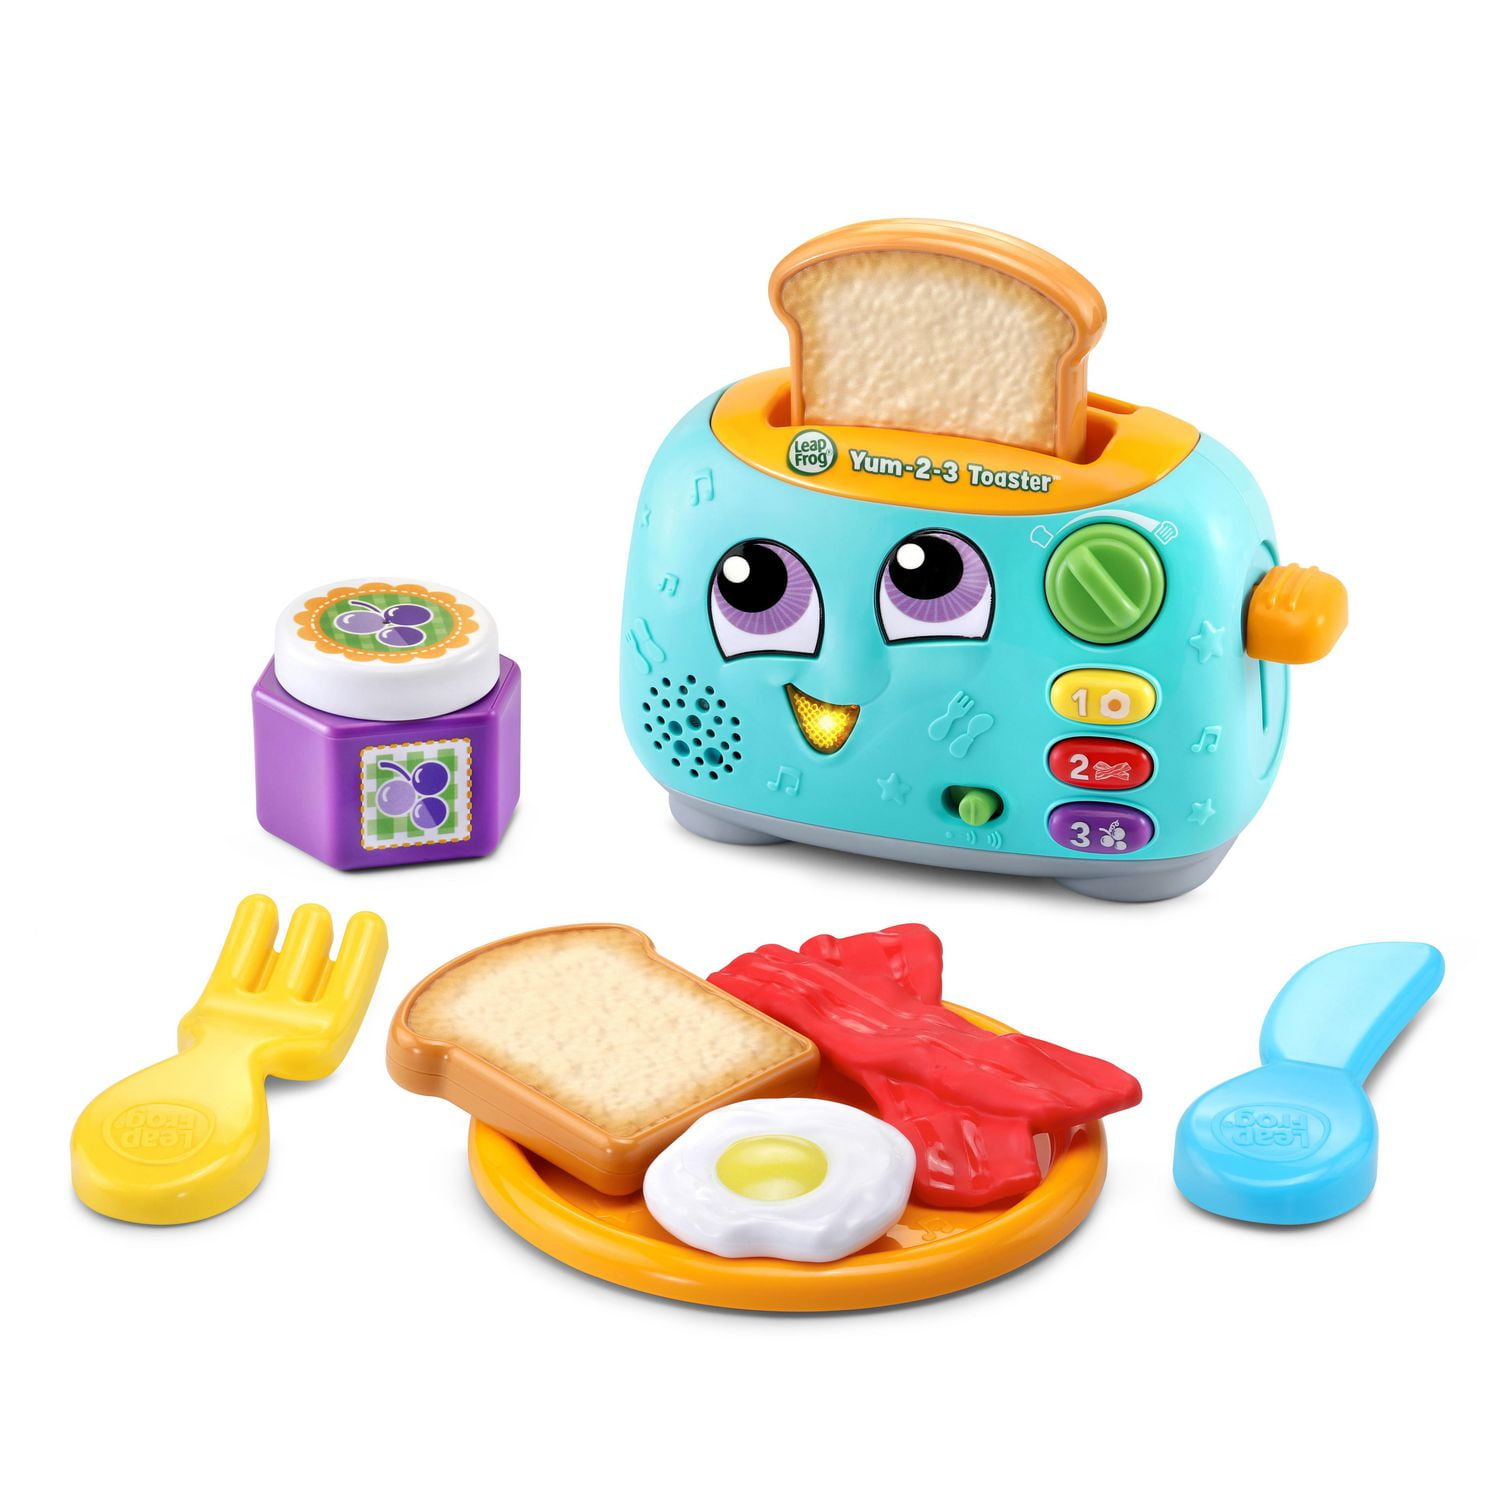 LeapFrog Yum-2-3 Toaster™ - English Version, 12+ months, 9 play